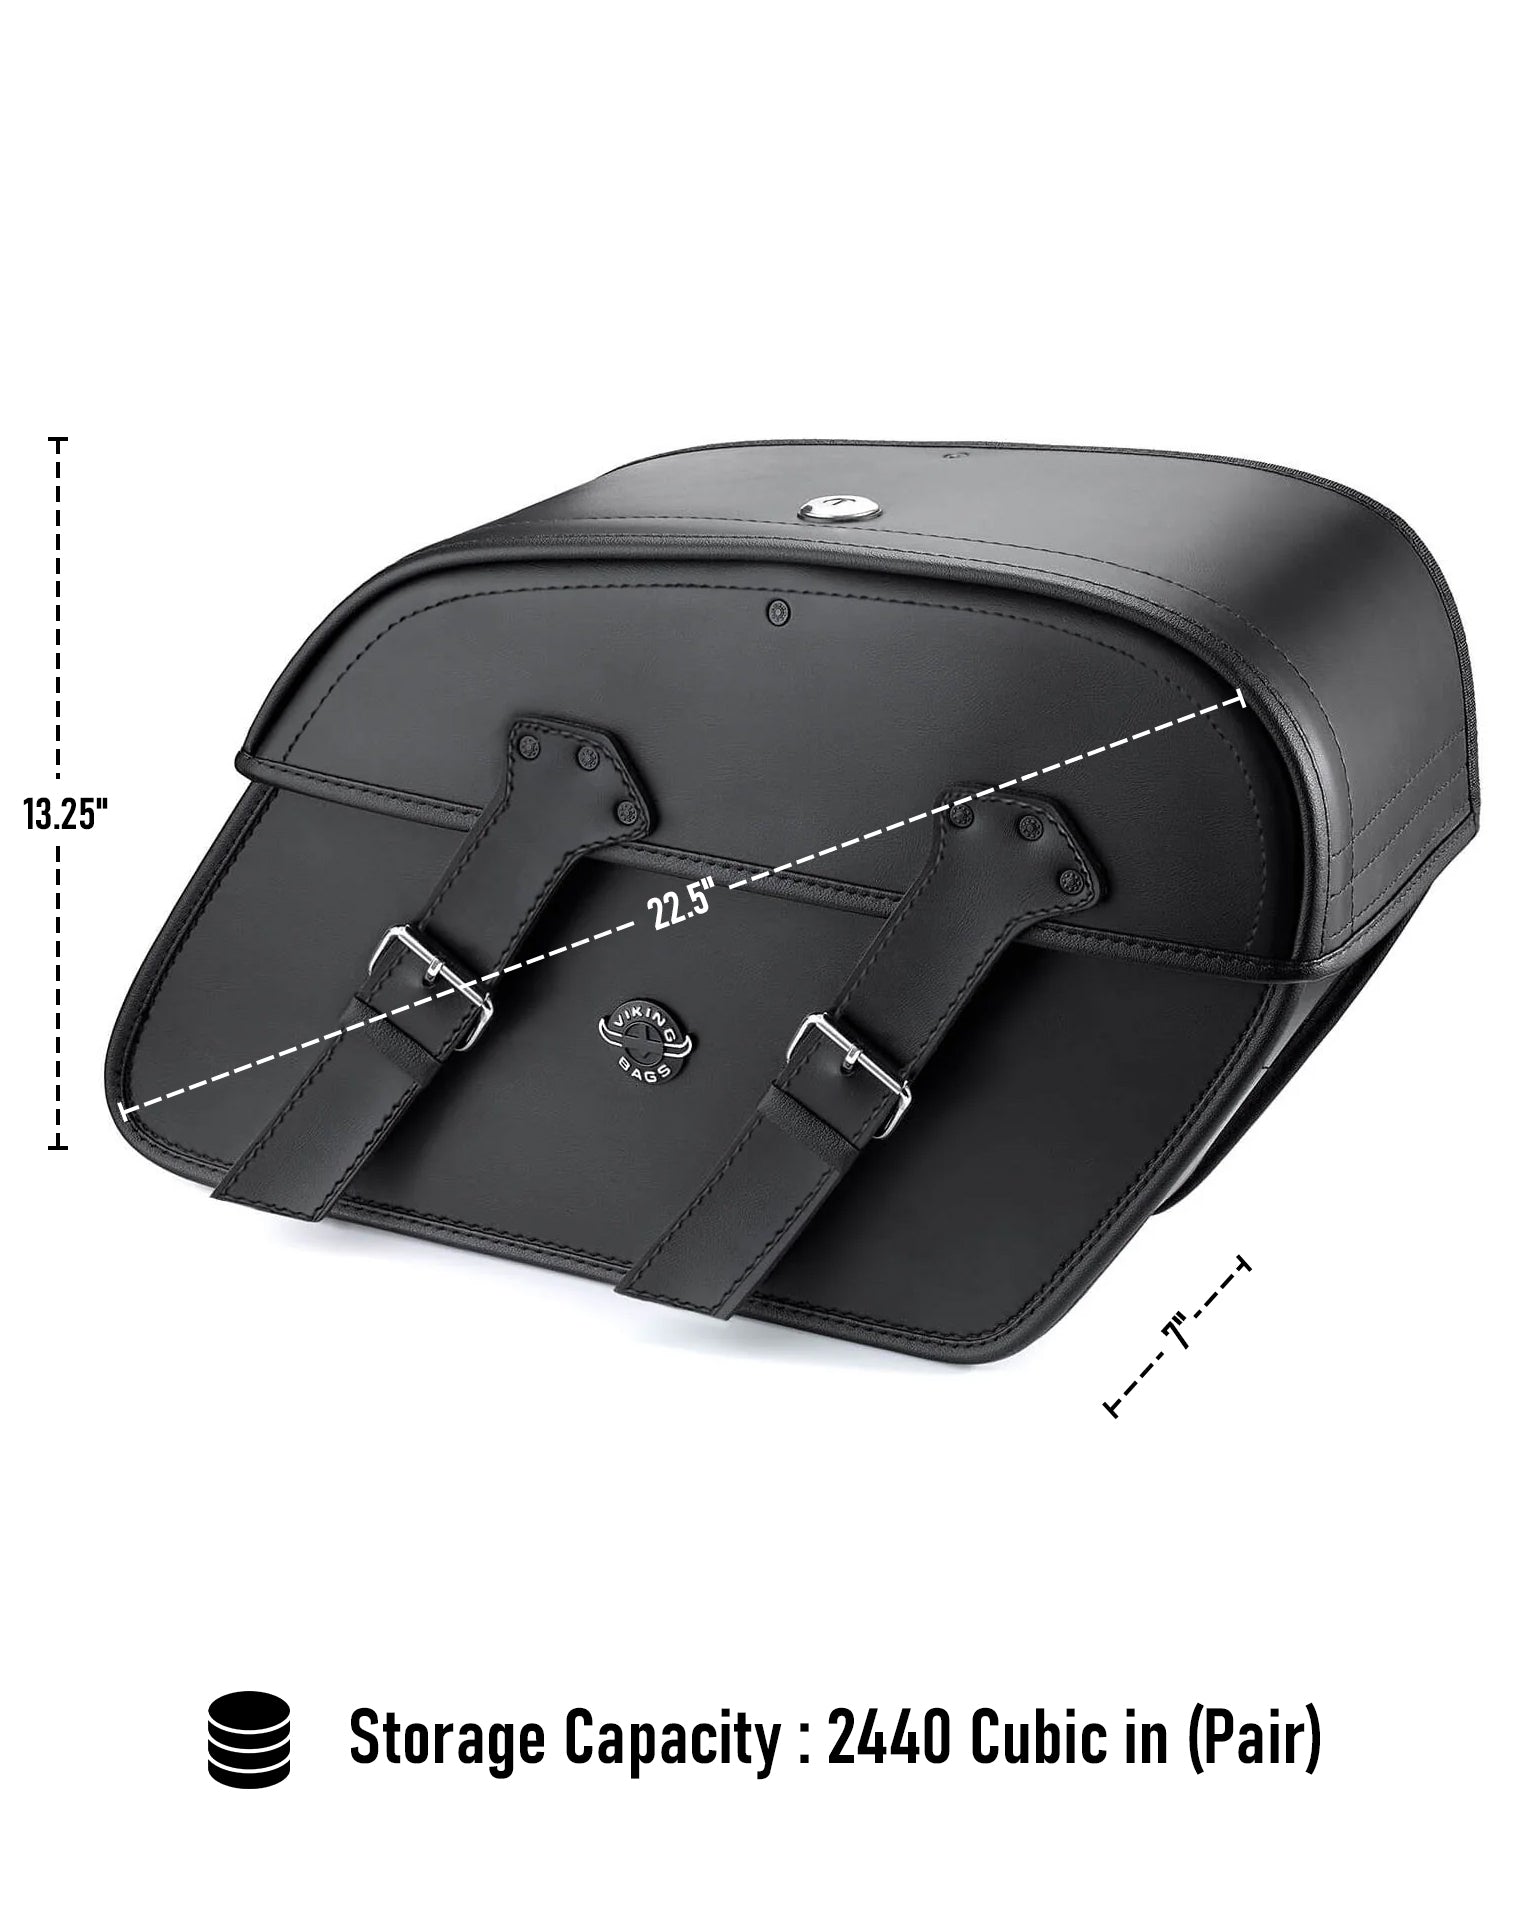 Viking Raven Extra Large Honda Vtx 1300 C Leather Motorcycle Saddlebags Can Store Your Ridings Gears